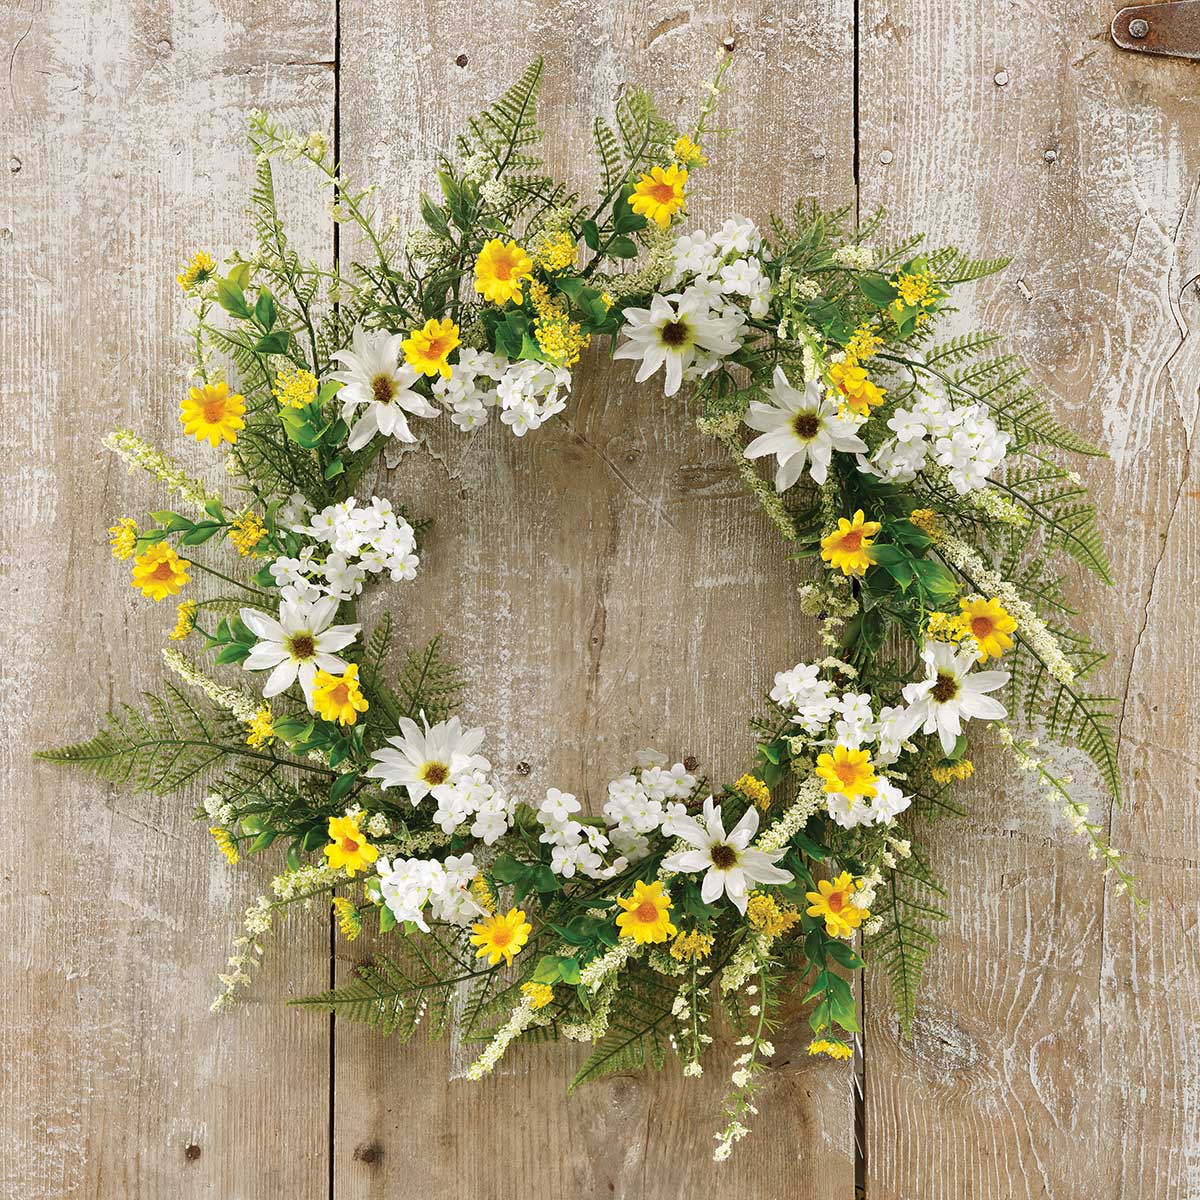 WREATH SUMMERTIME DAISY 22IN (INNER RING 12IN) POLYESTER/PLASTIC - Click Image to Close